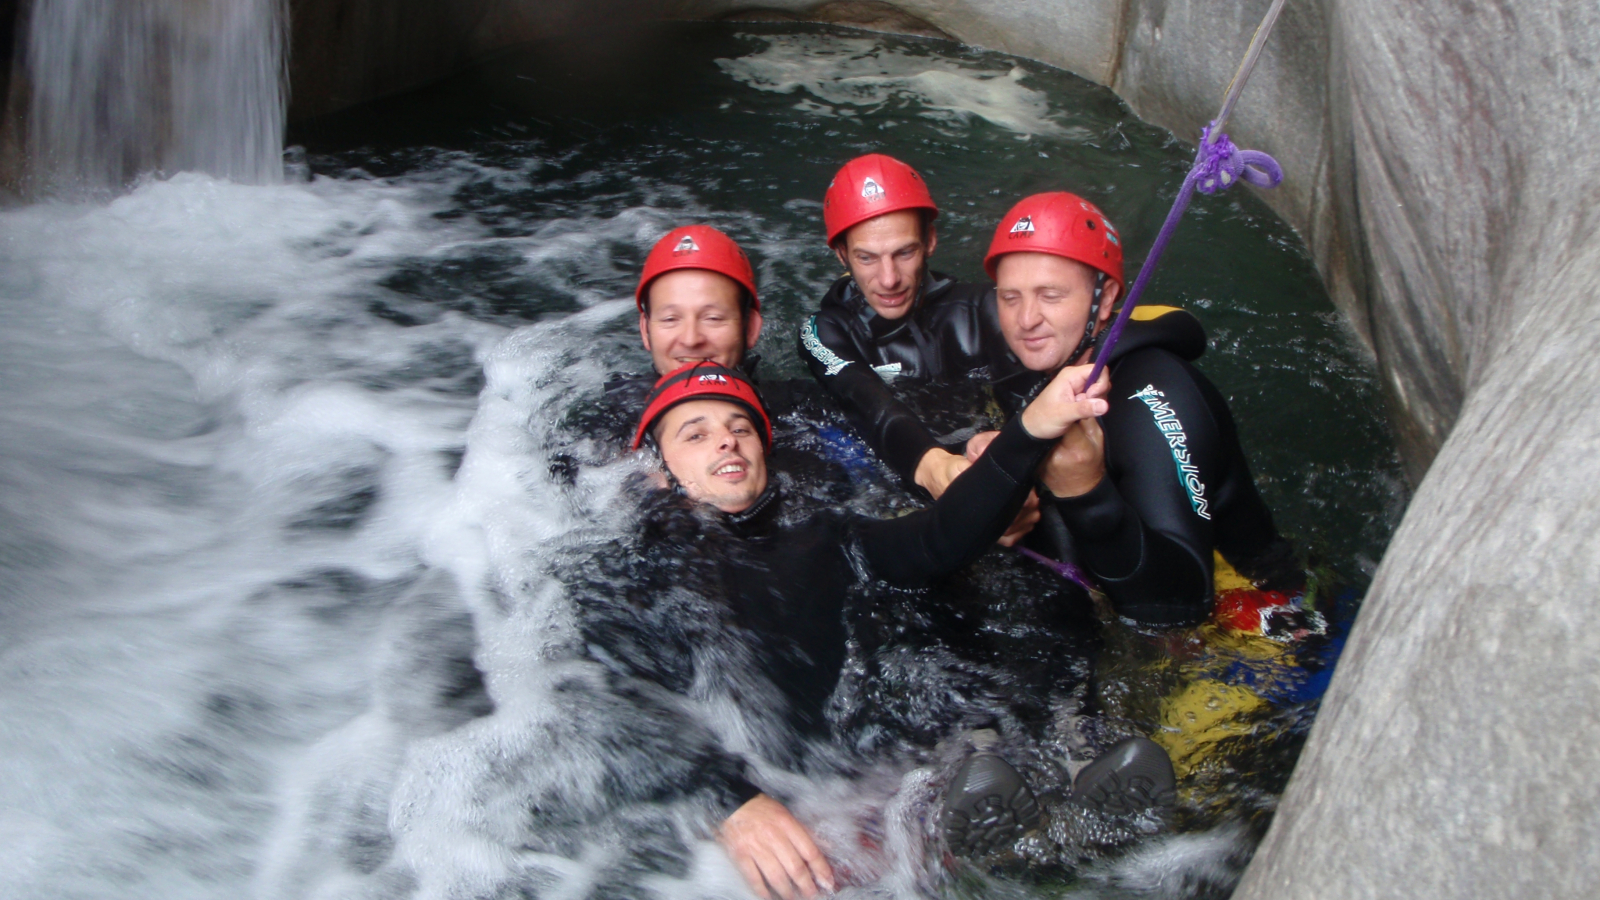 Canyoning practitioners